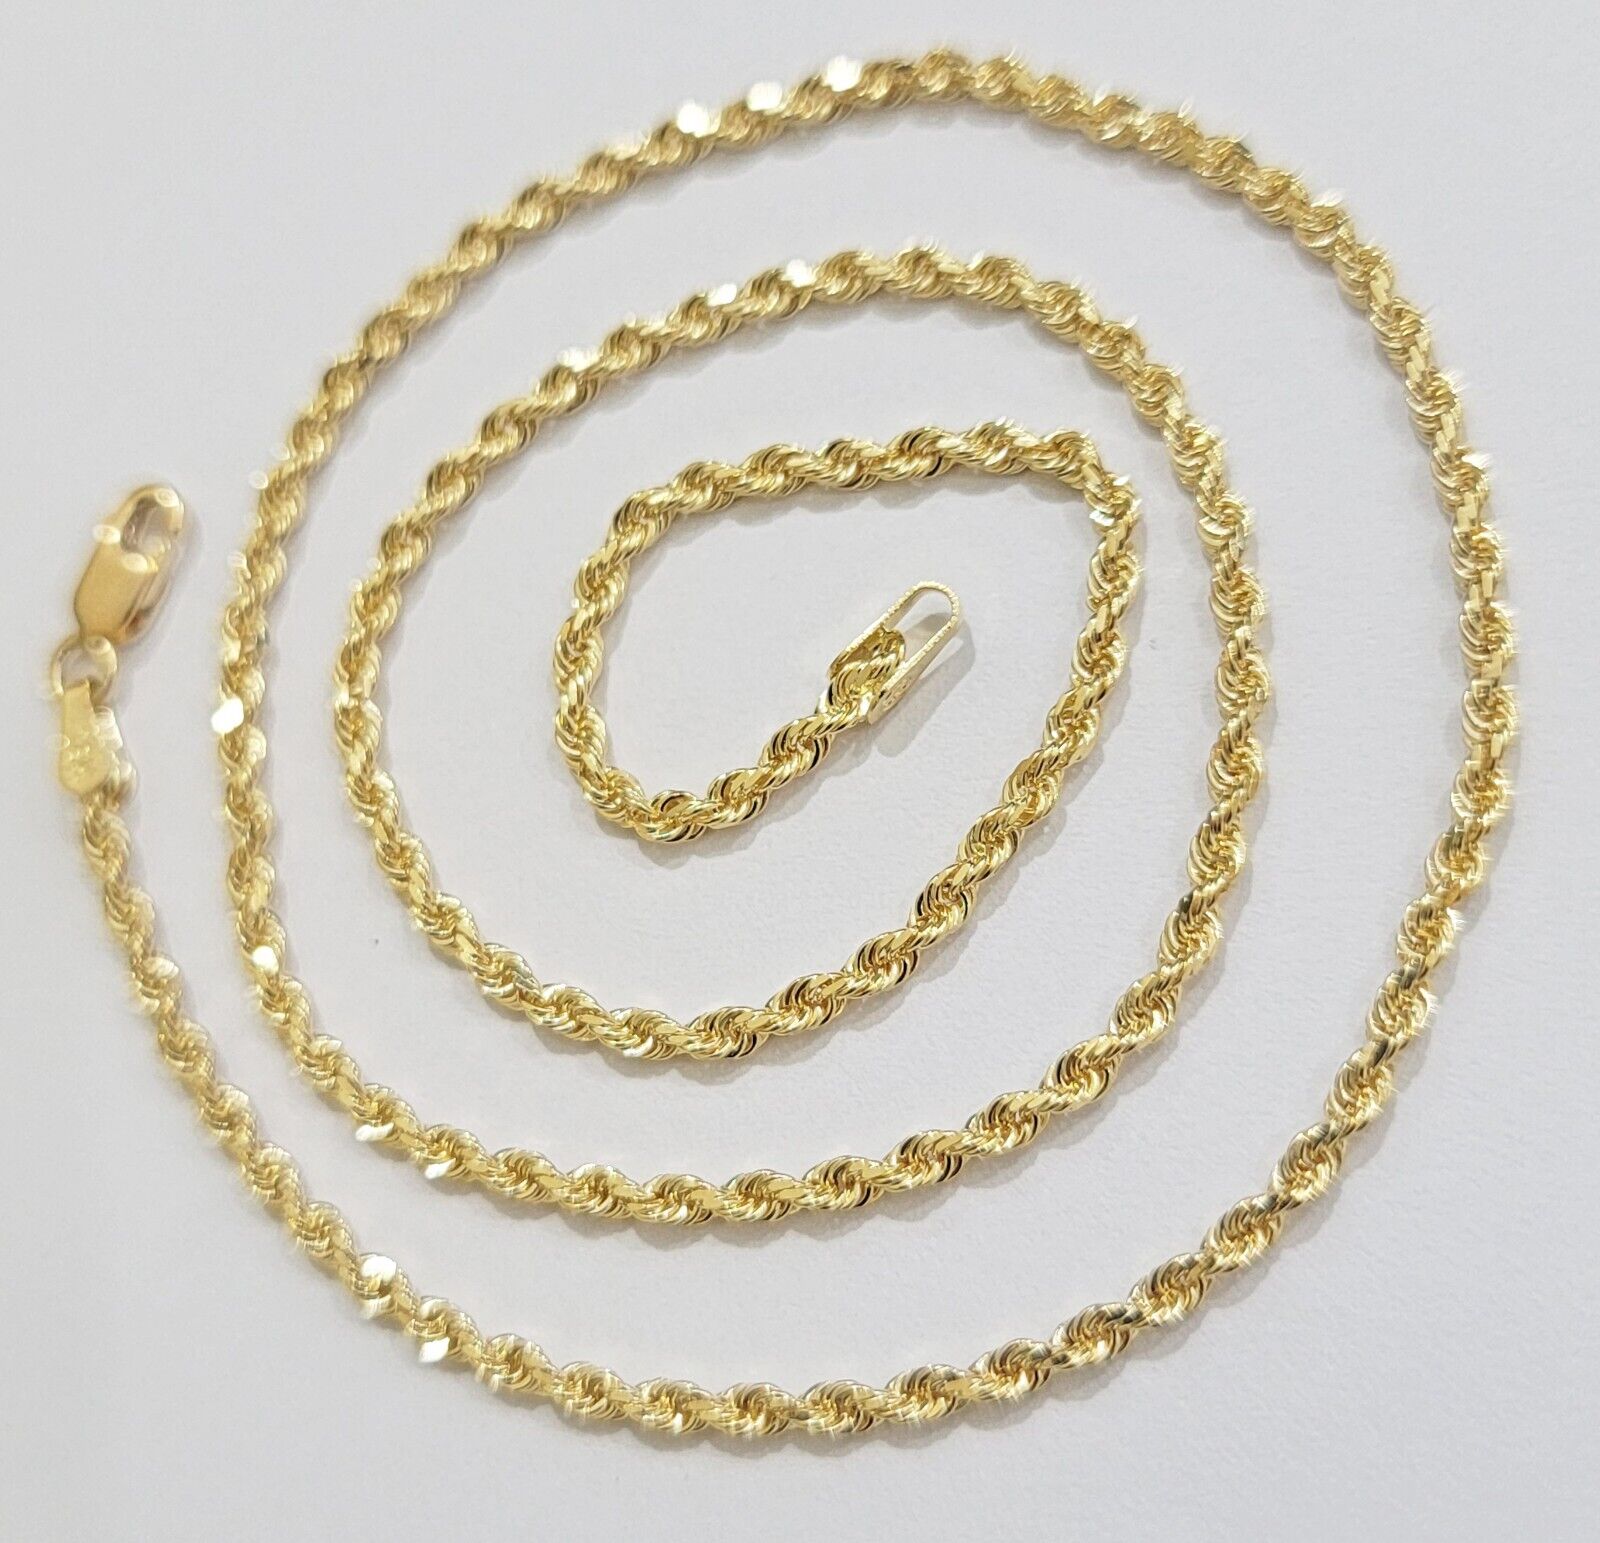 Real 18k Yellow Gold Rope Chain Necklace 20 Inch 2mm Men Women 18 KT SOLID, SALE